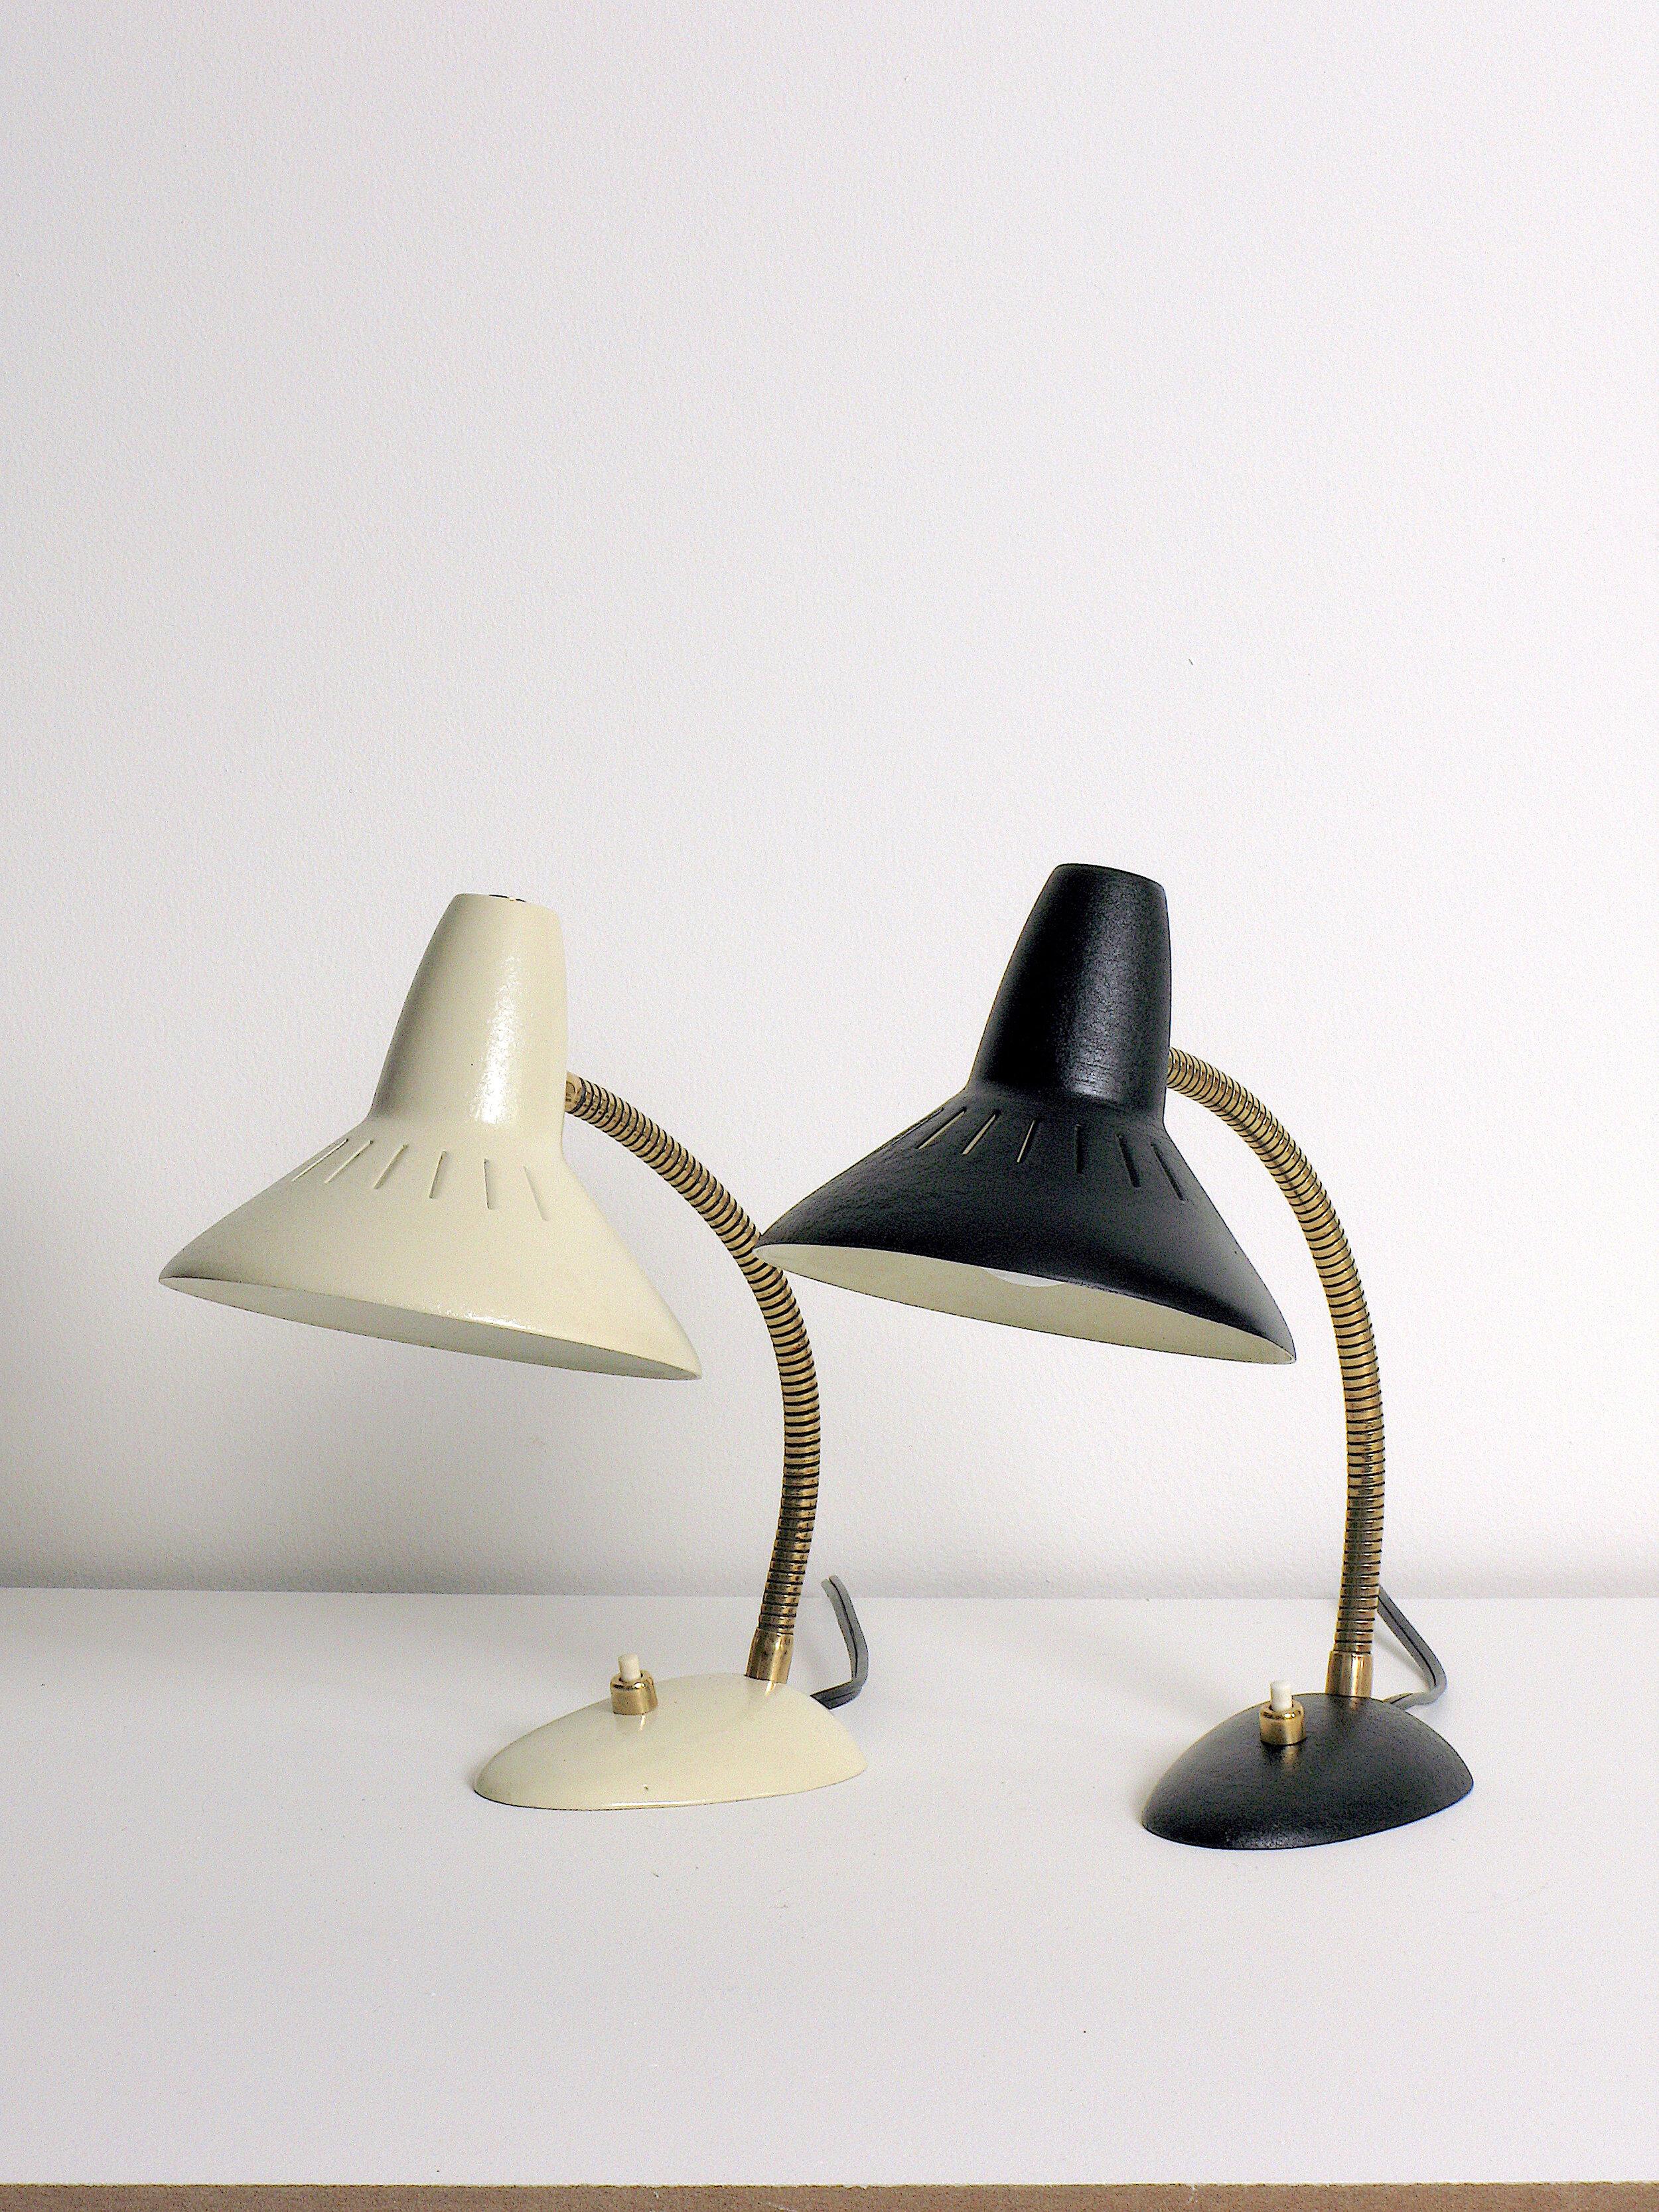 Pair of petite German desk lamps. Enameled vented steel shades, brass gooseneck, enameled steel base. 40 watts max G-16.5 candelabra incandescent bulbs recommended or higher if LED/CFL.

Rewired with a E-12 candelabra base socket, 18/2 black plastic